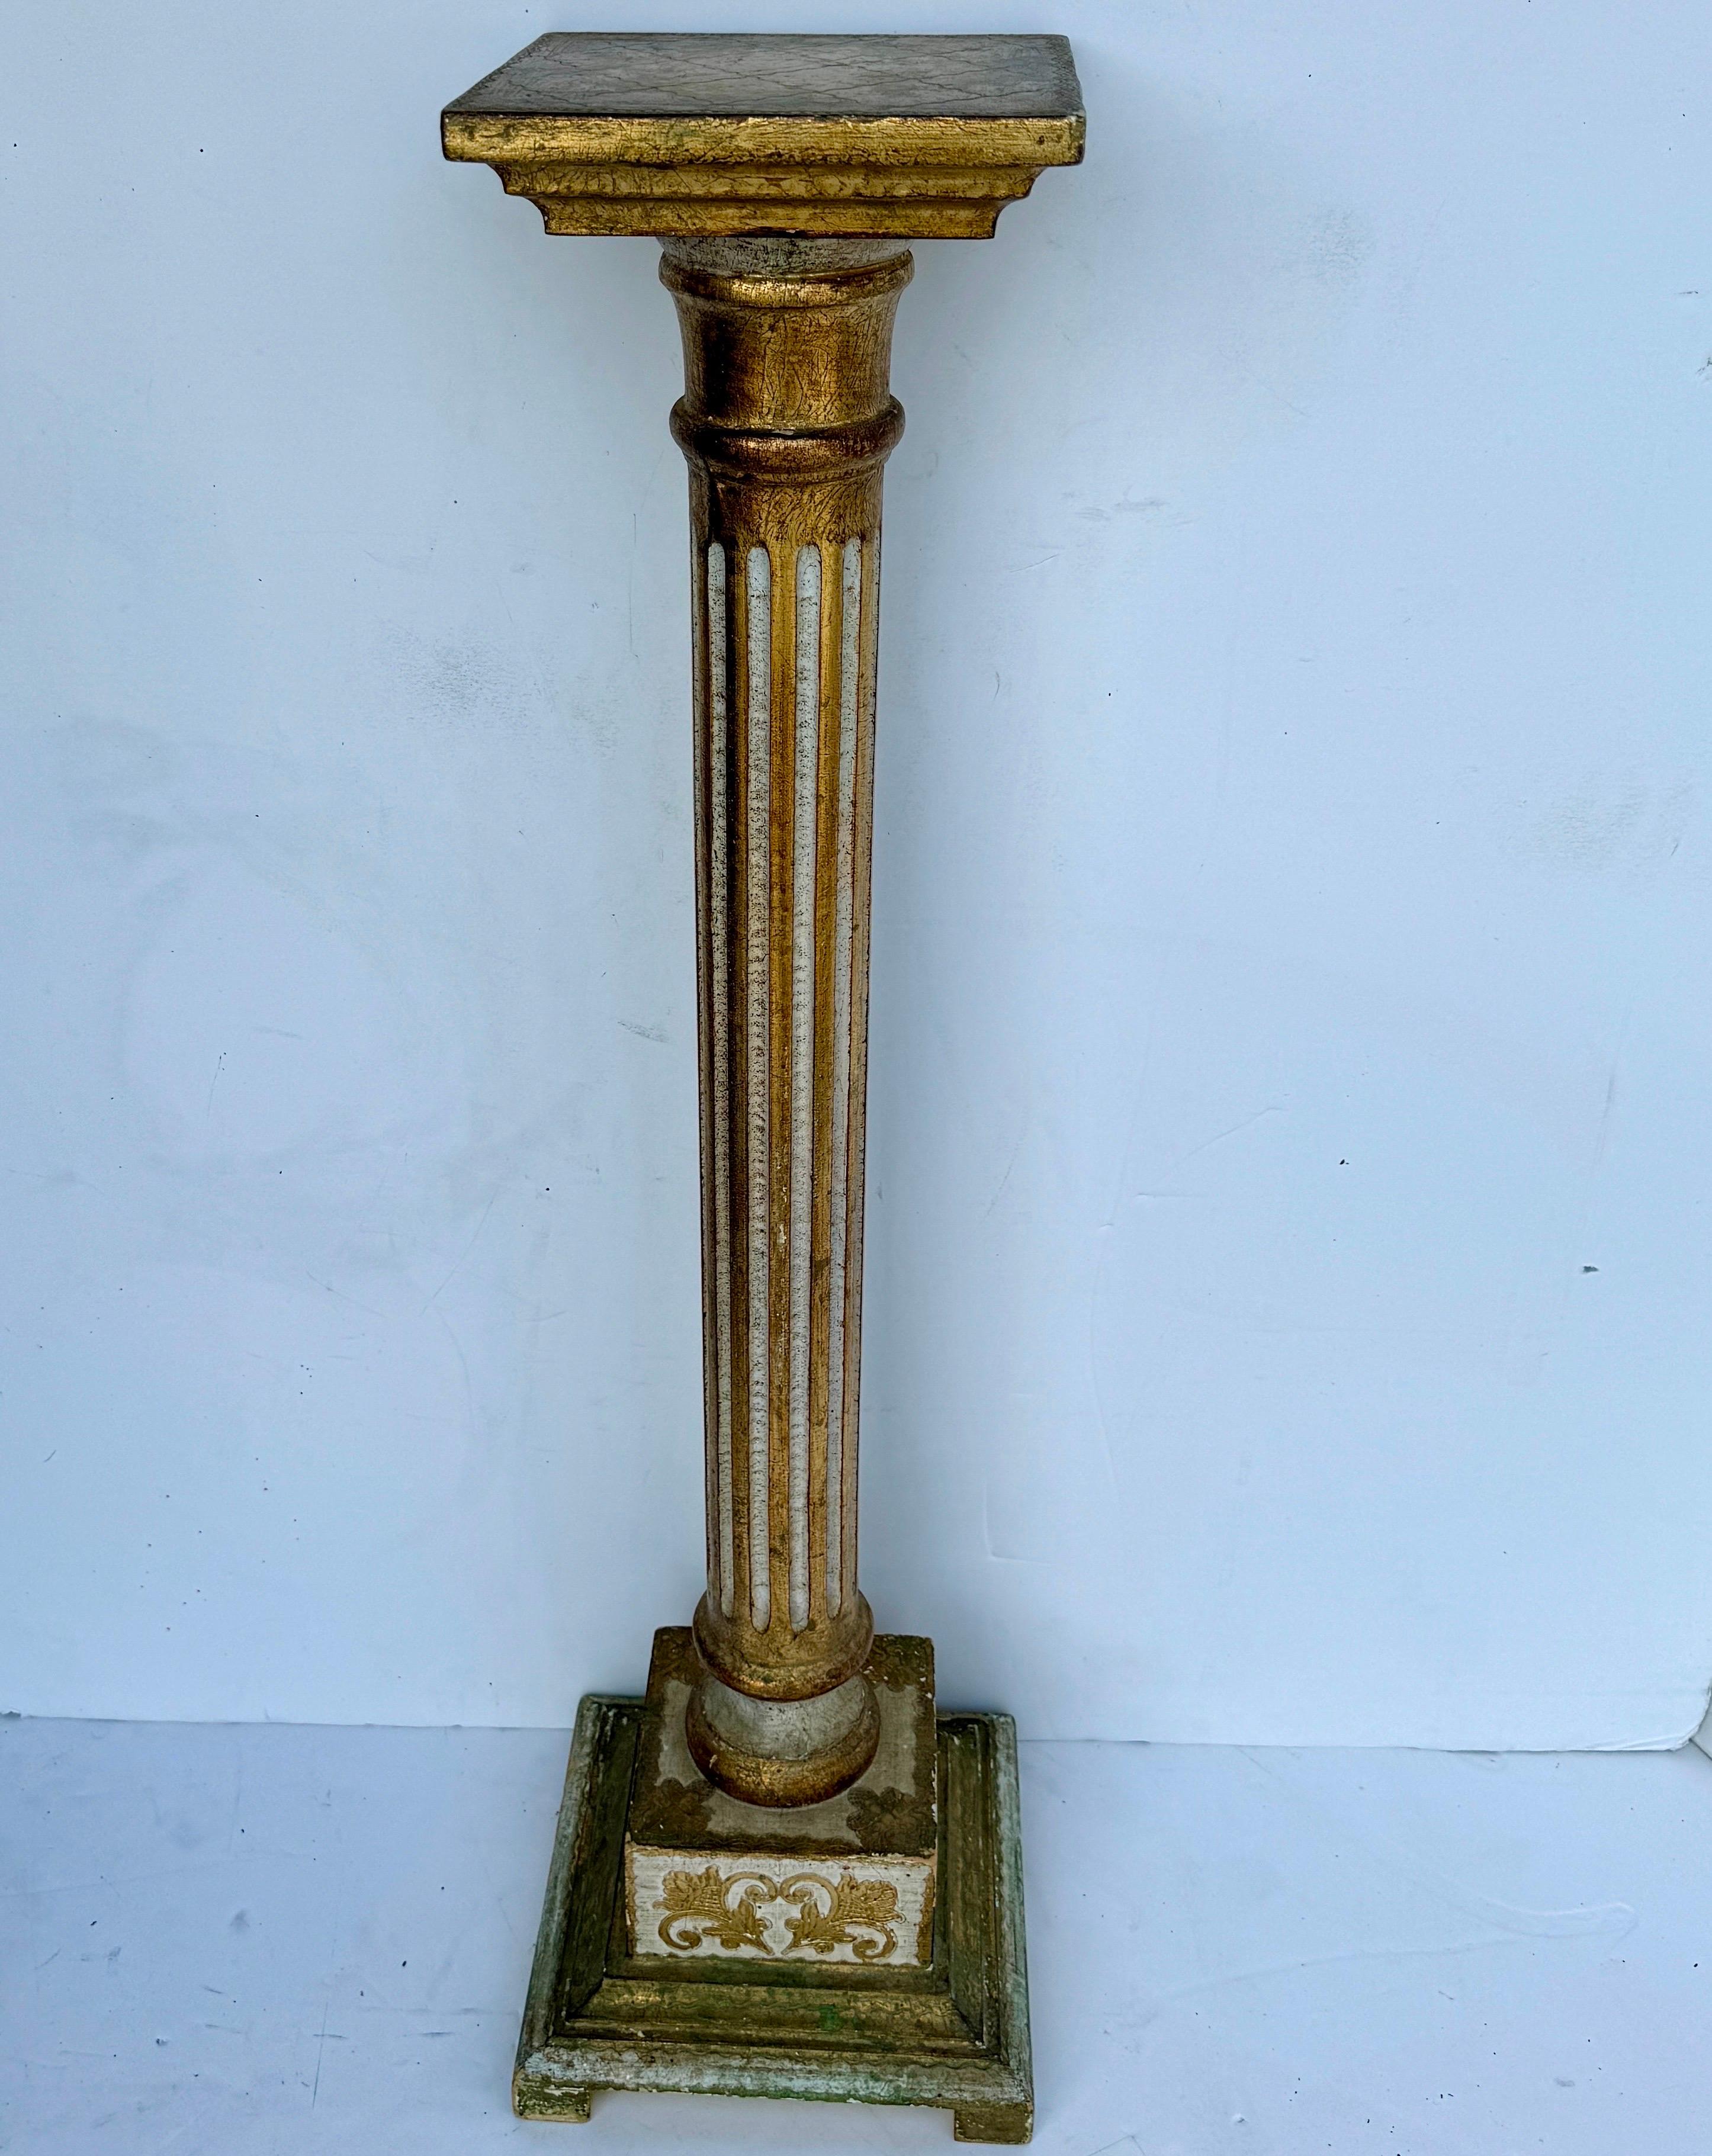 Mid-Century Modern Period Florentine Gold Gilt and Cream Pedestal, circa 1950-60's Italy.

Classic and versatile Florentine Mid-Century stand. Can be a stand-alone statement piece or functional to hold a plant in any formal or informal home setting.